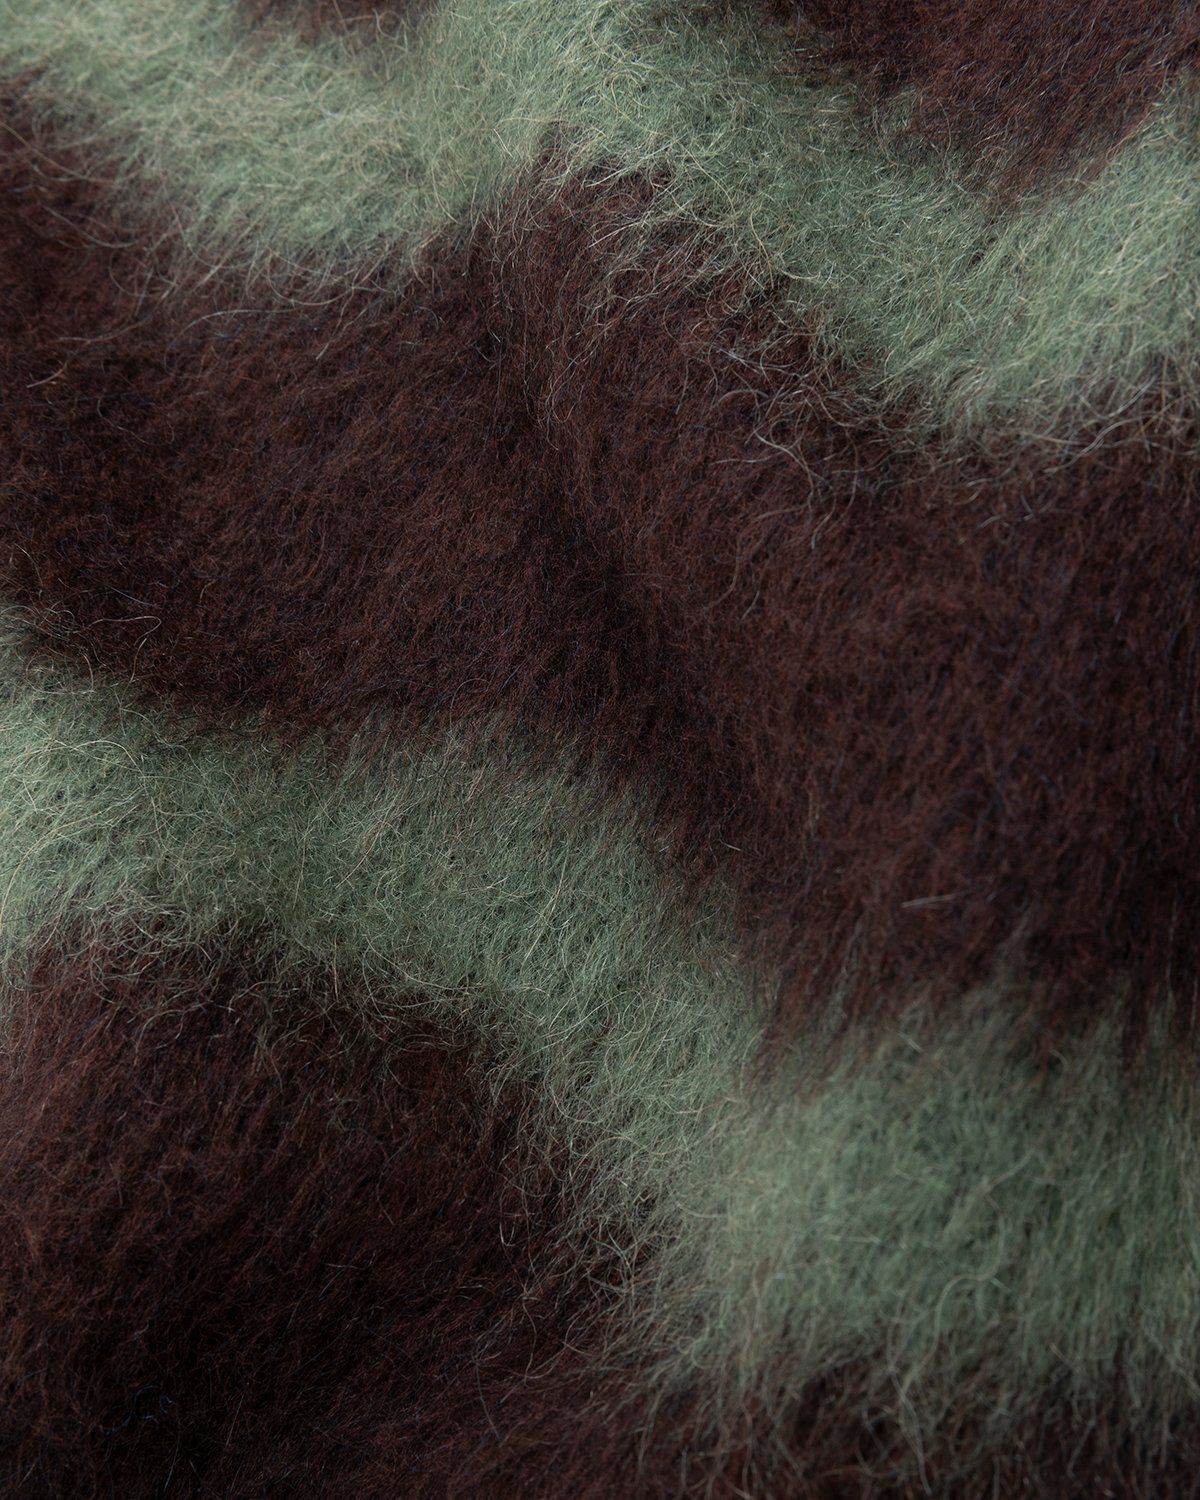 Acne Studios – Striped Fuzzy Sweater Brown/Military Green - Image 5